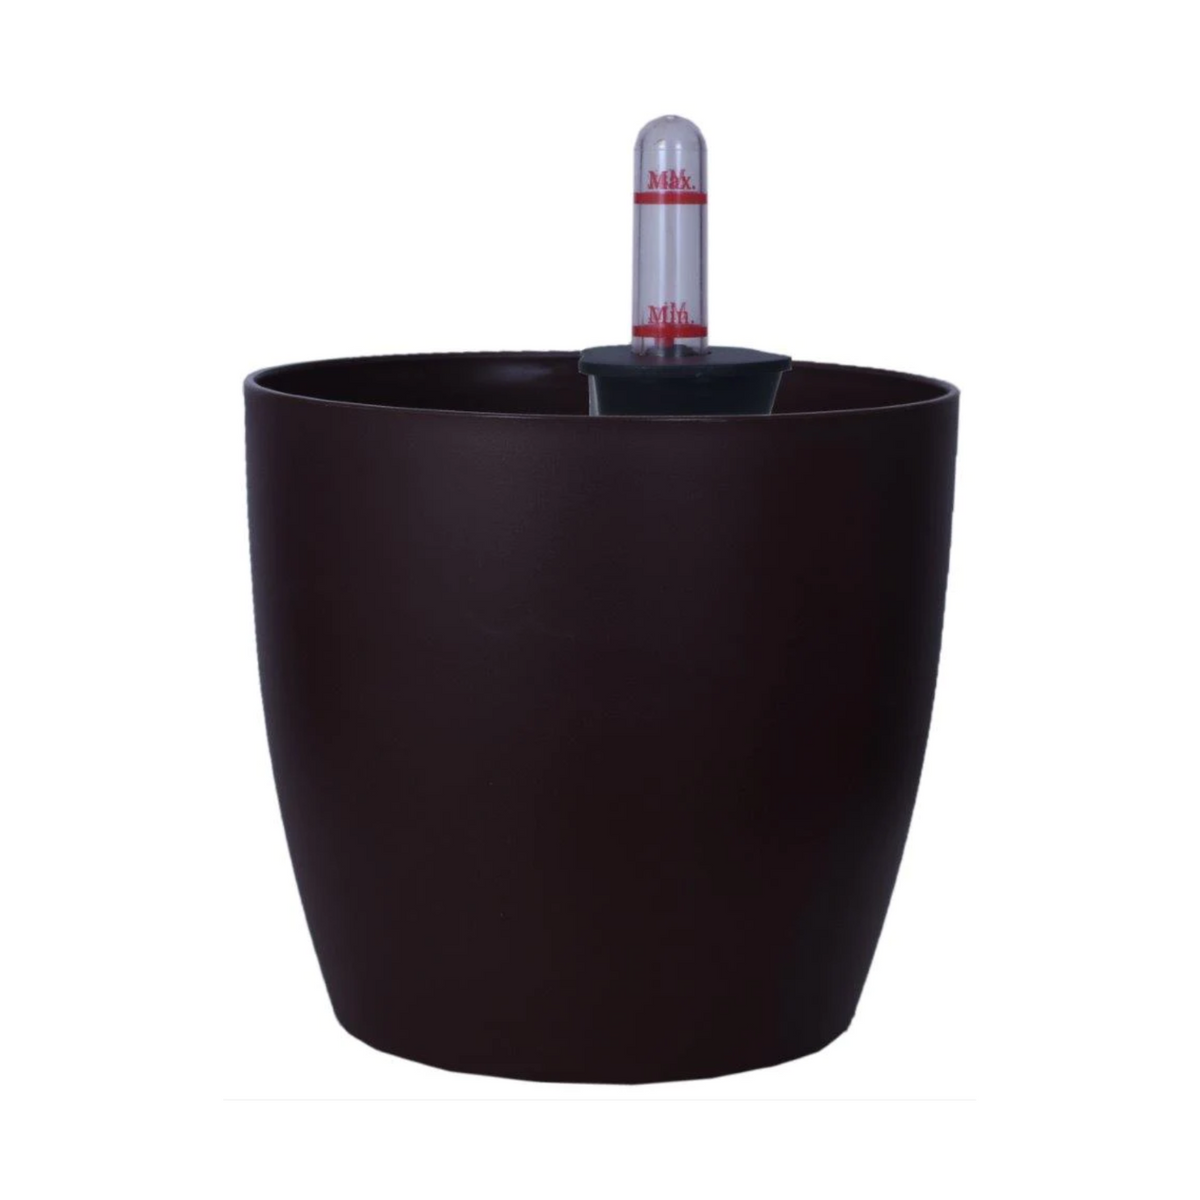 Ronda 1412 Round Plastic Pot With Self-Watering Kit